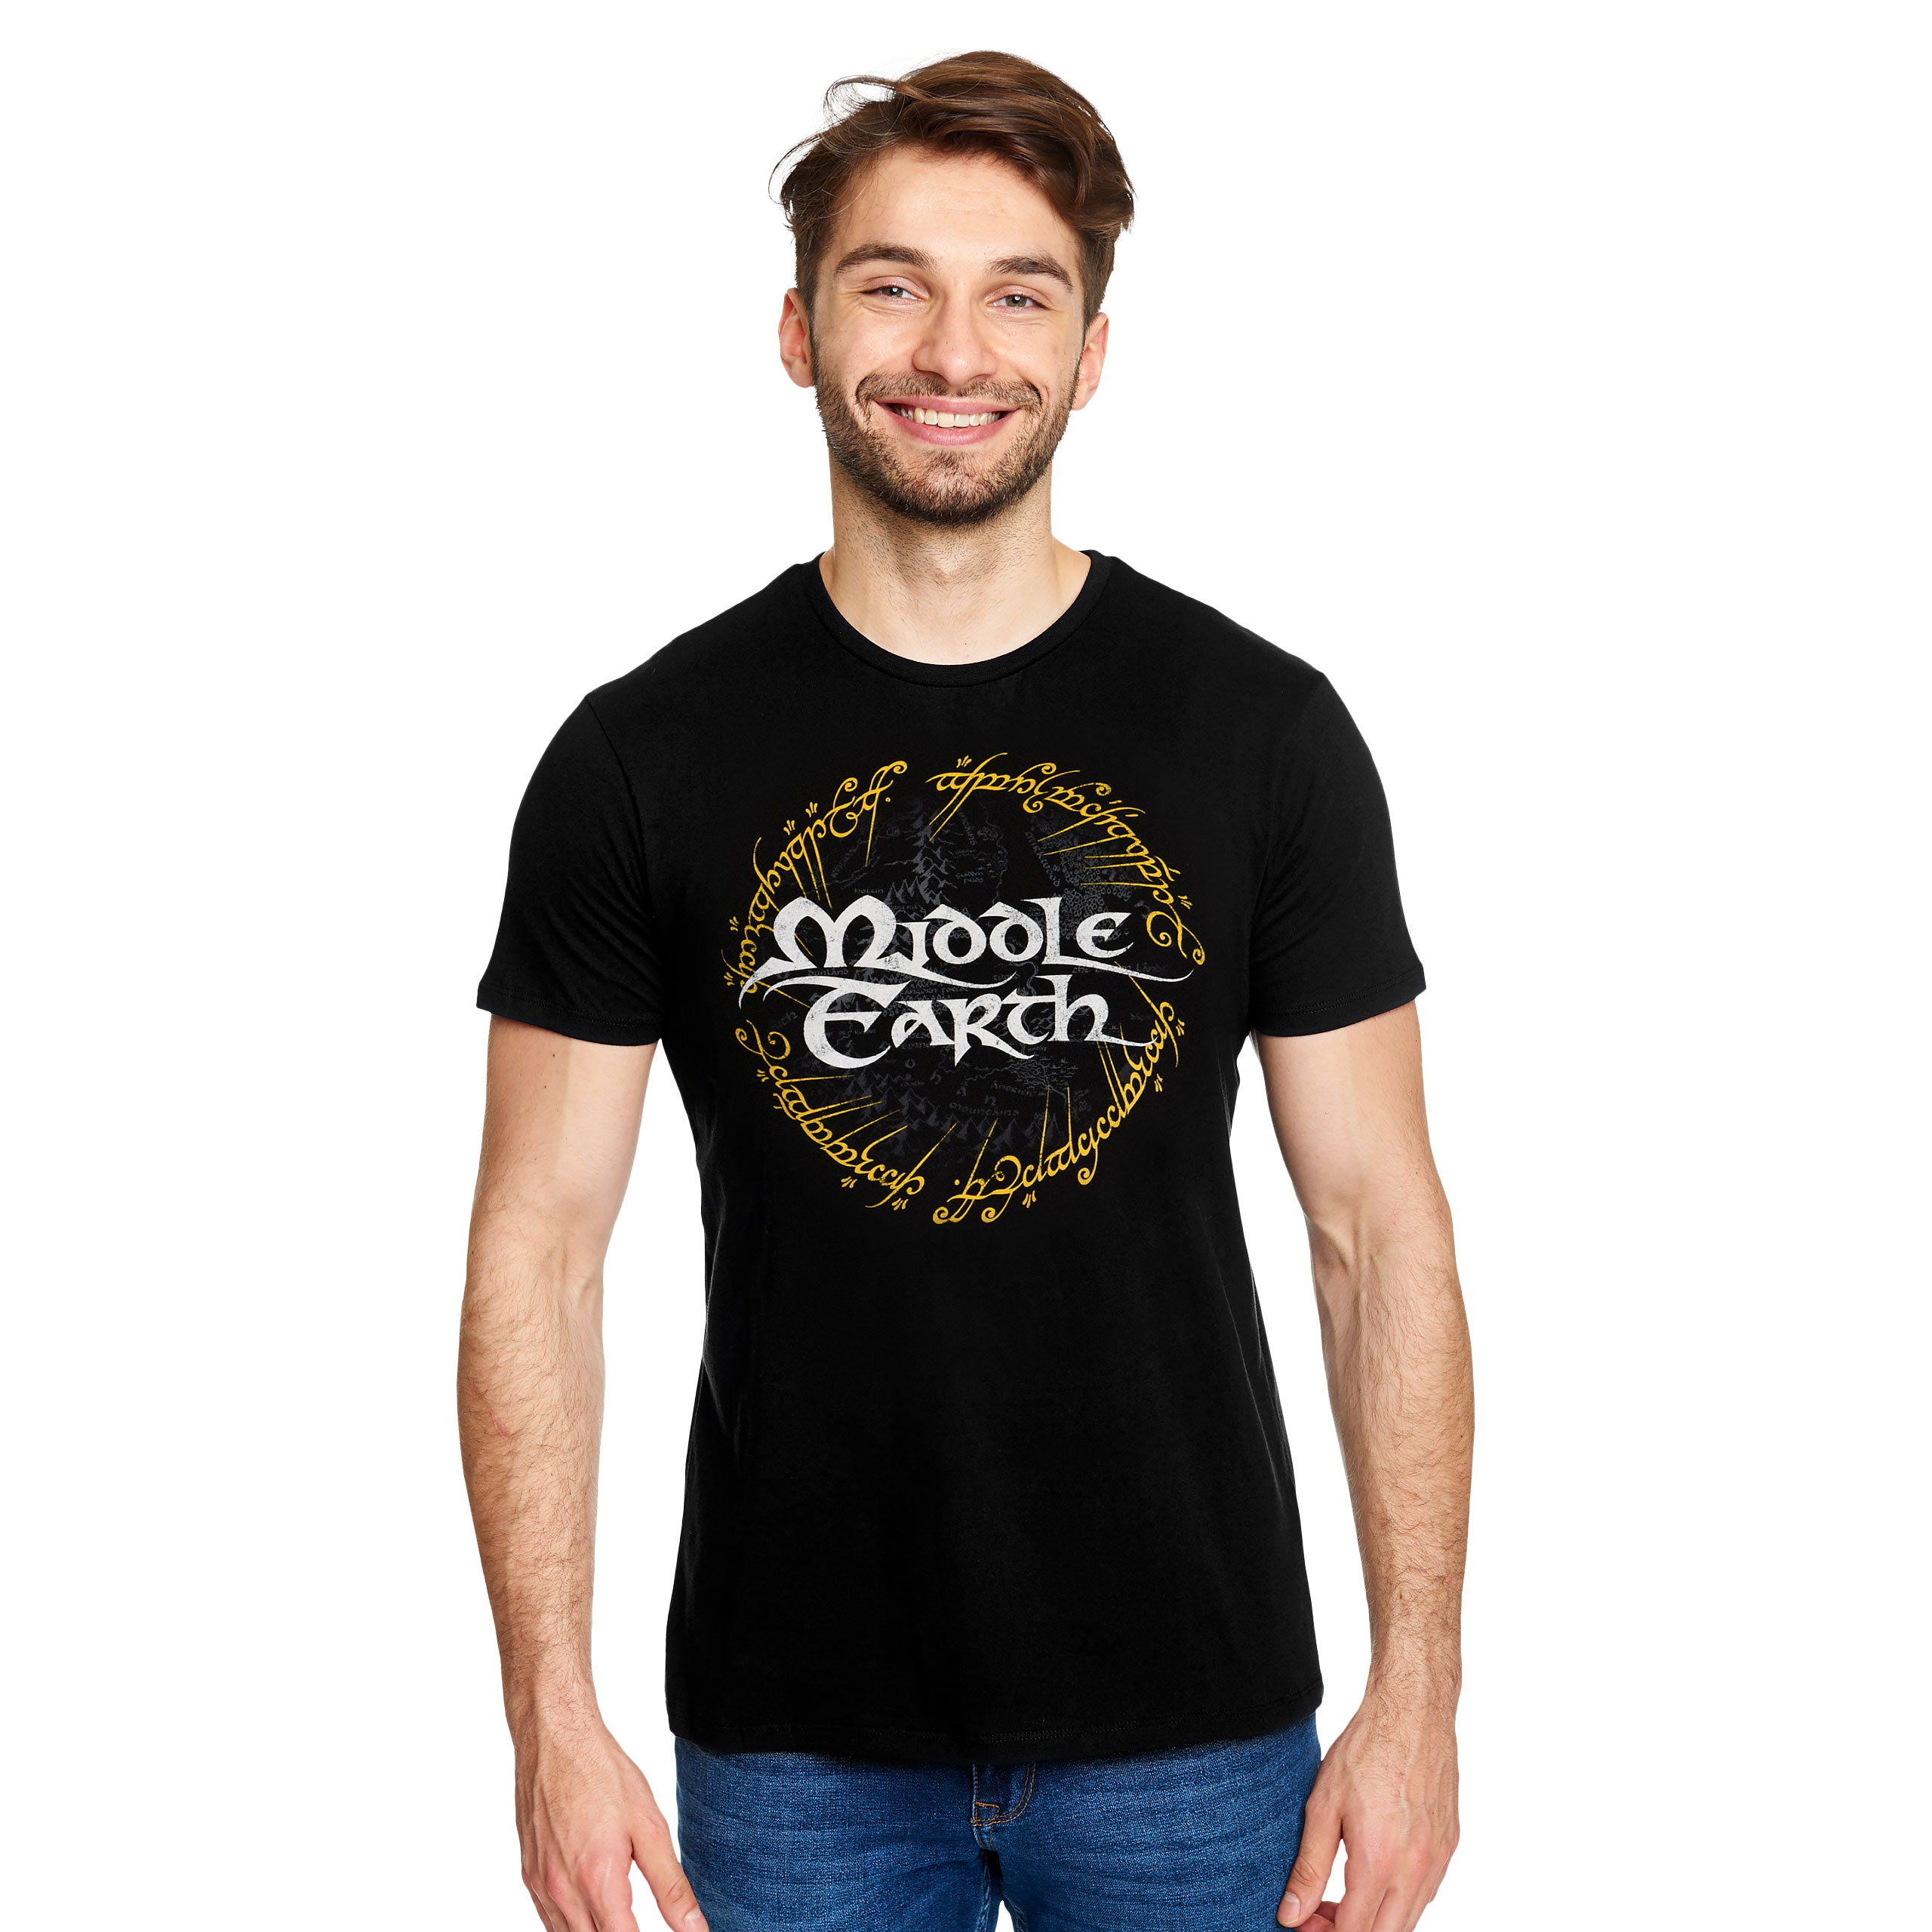 Lord of the Rings - Middle Earth T-Shirt black